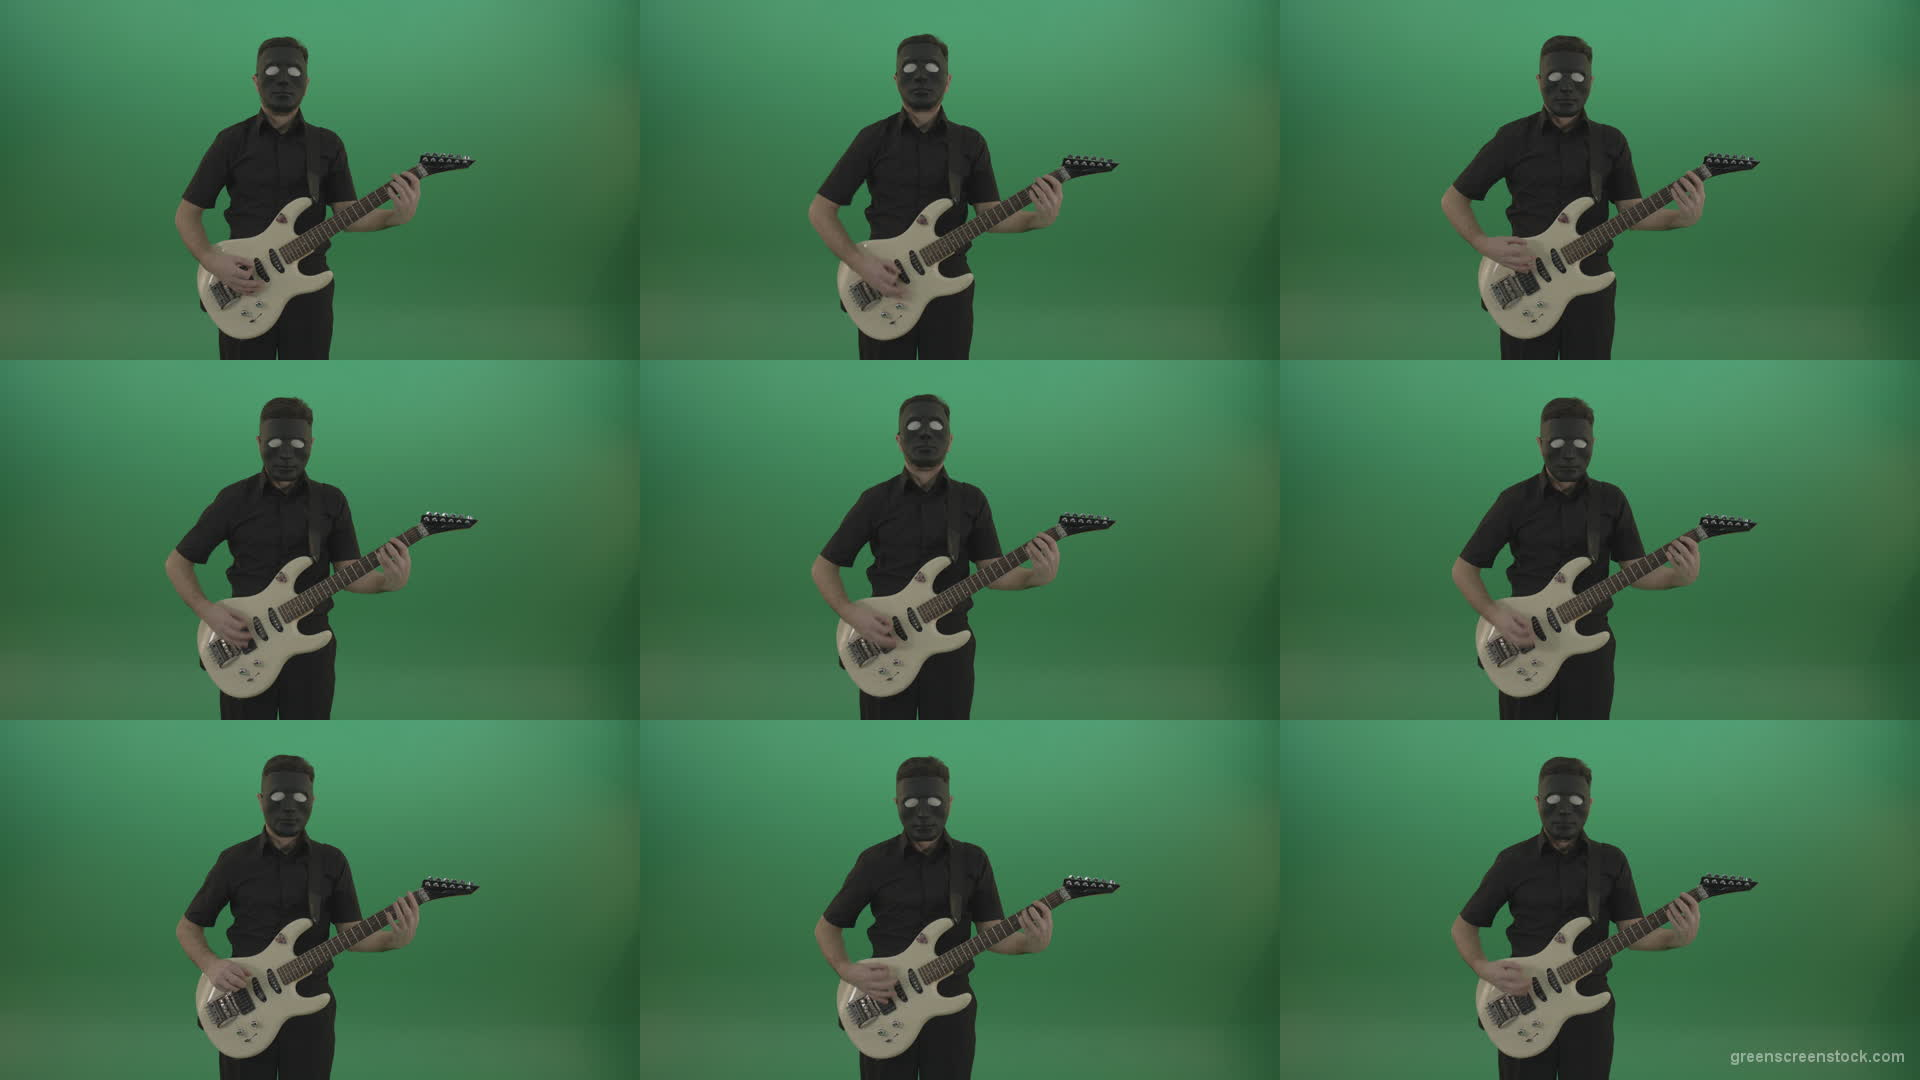 Hard-rock-guitarist-man-playing-white-guitar-in-black-mask-isolated-on-green-background Green Screen Stock